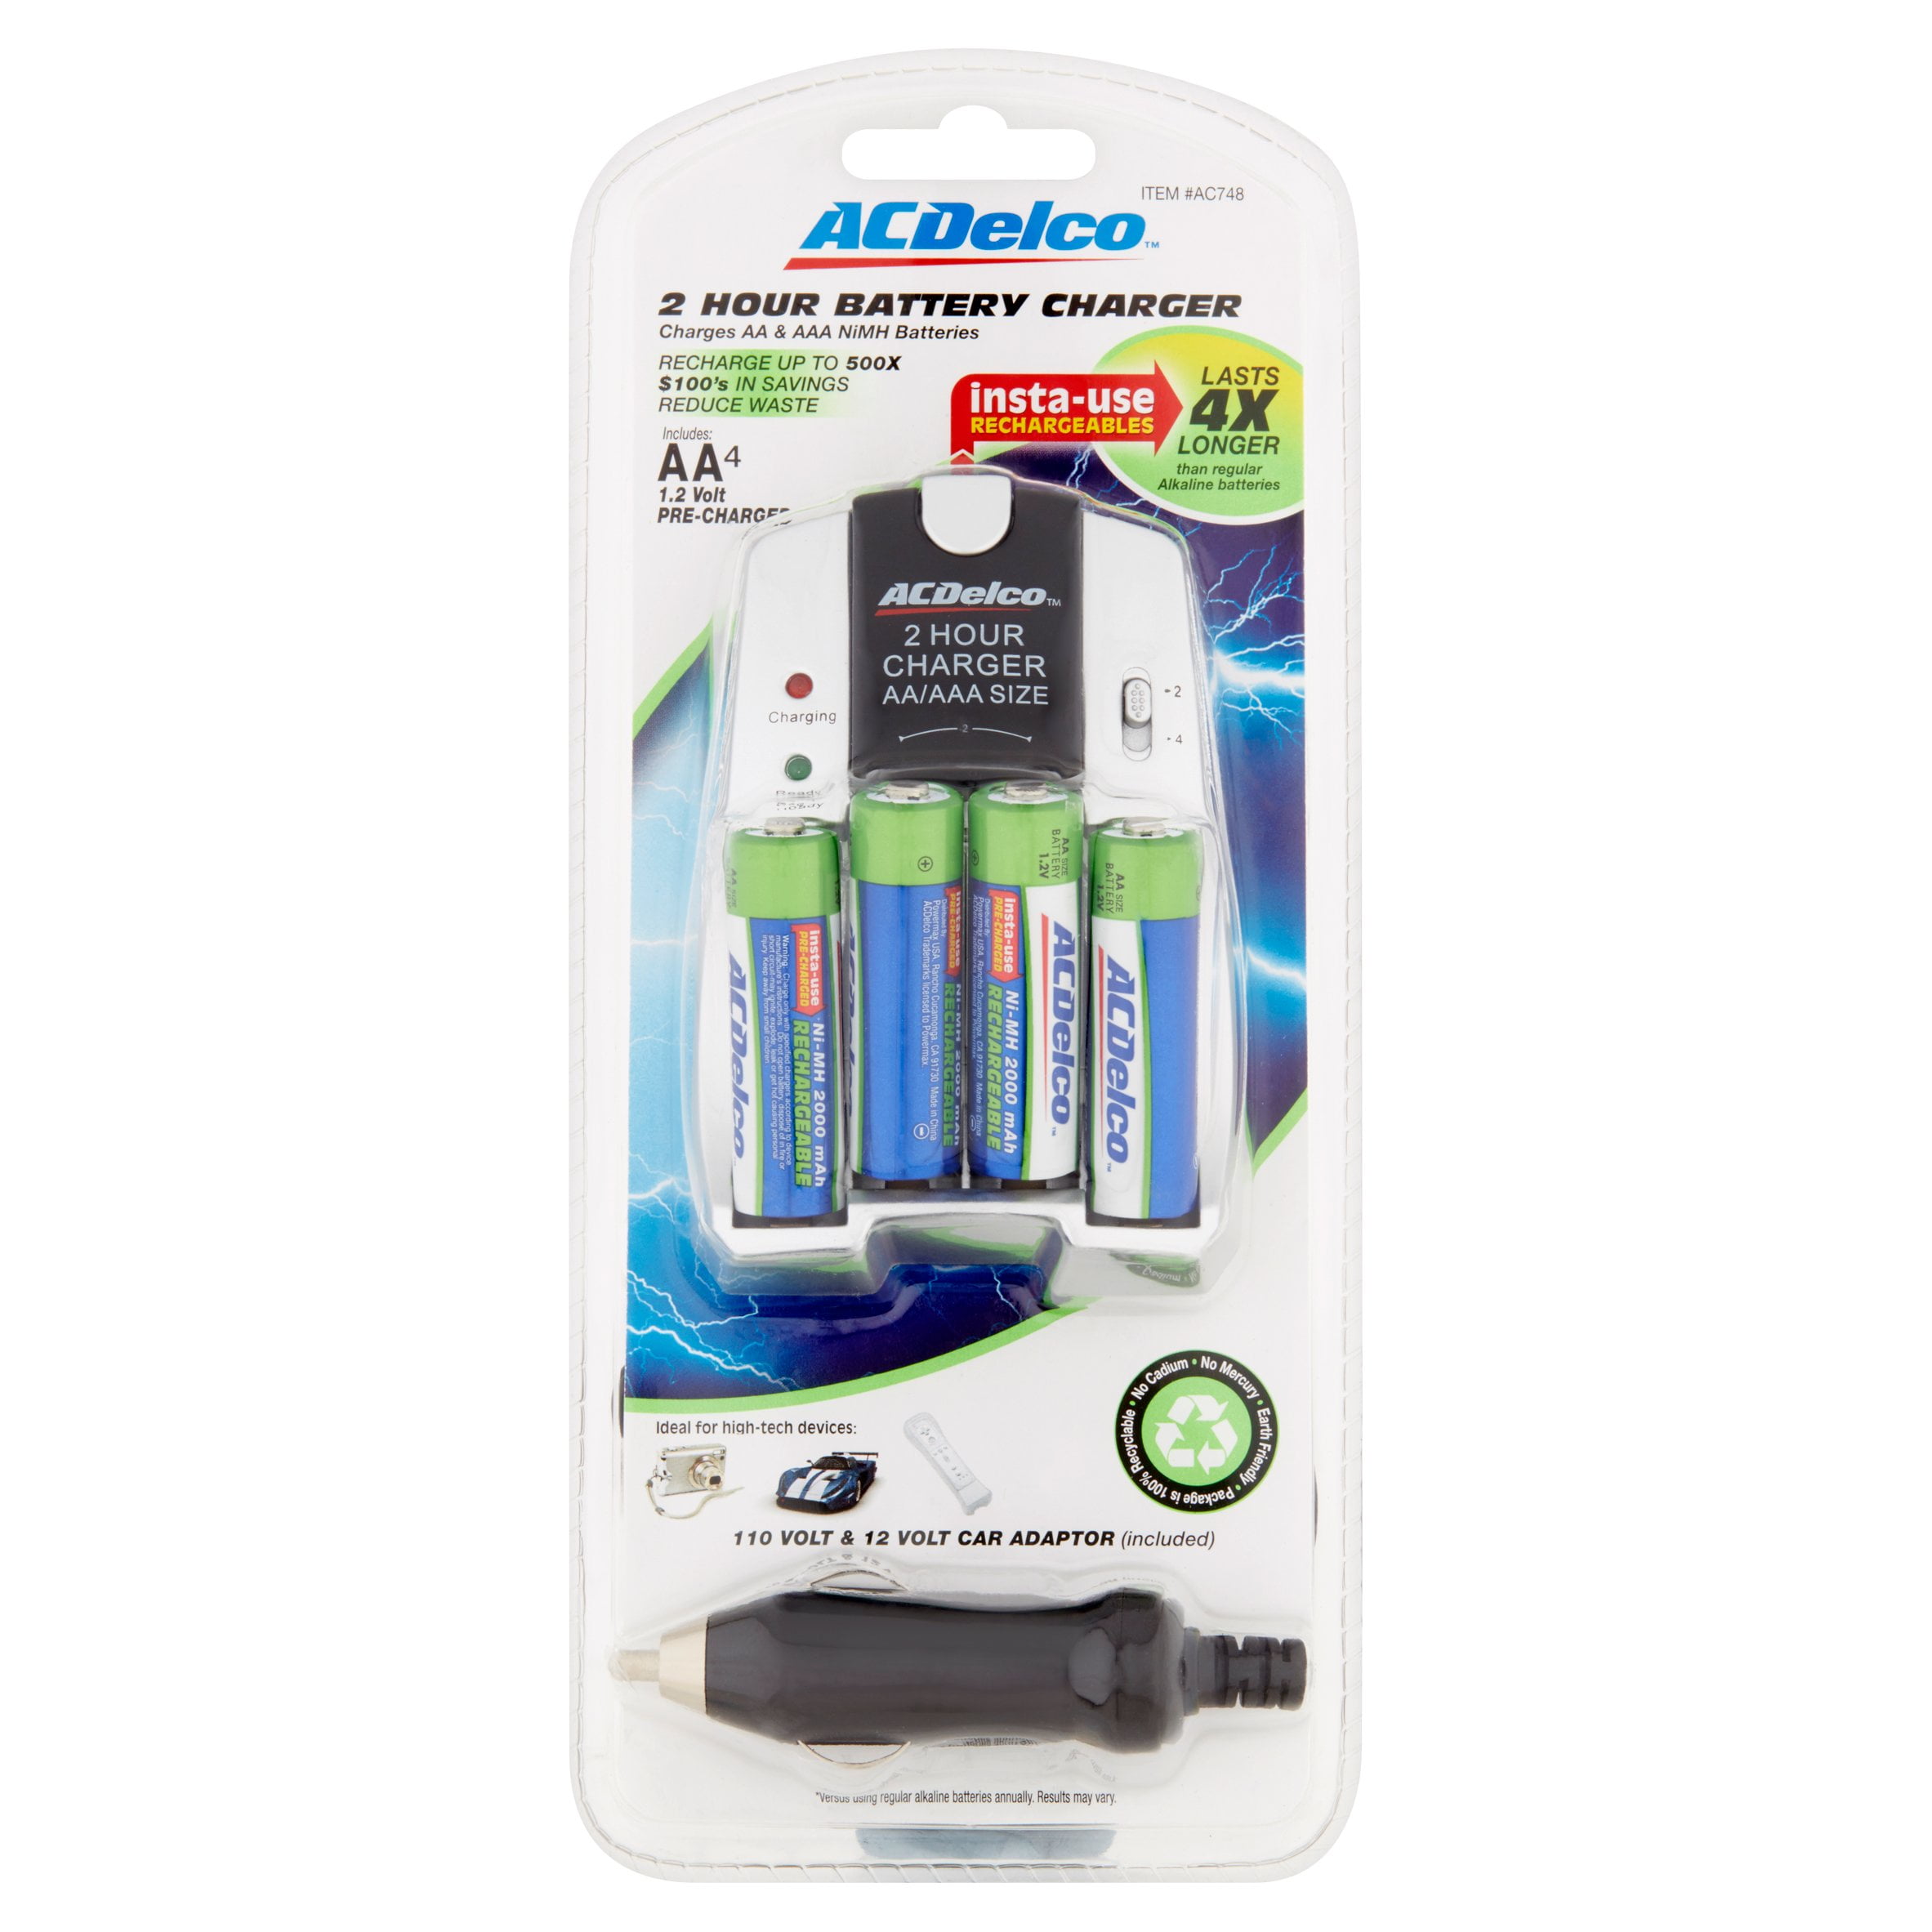 2950 mAh I3ePro BP-SCH1 Supercharge Ni-MH AA AAA 9V Rechargeable Battery Charger with 4 AA Rechargeable Batteries for Fuji FINEPIX S2 PRO 40i S9000 S3 S5000 S7000 S20 S3200 S2980 